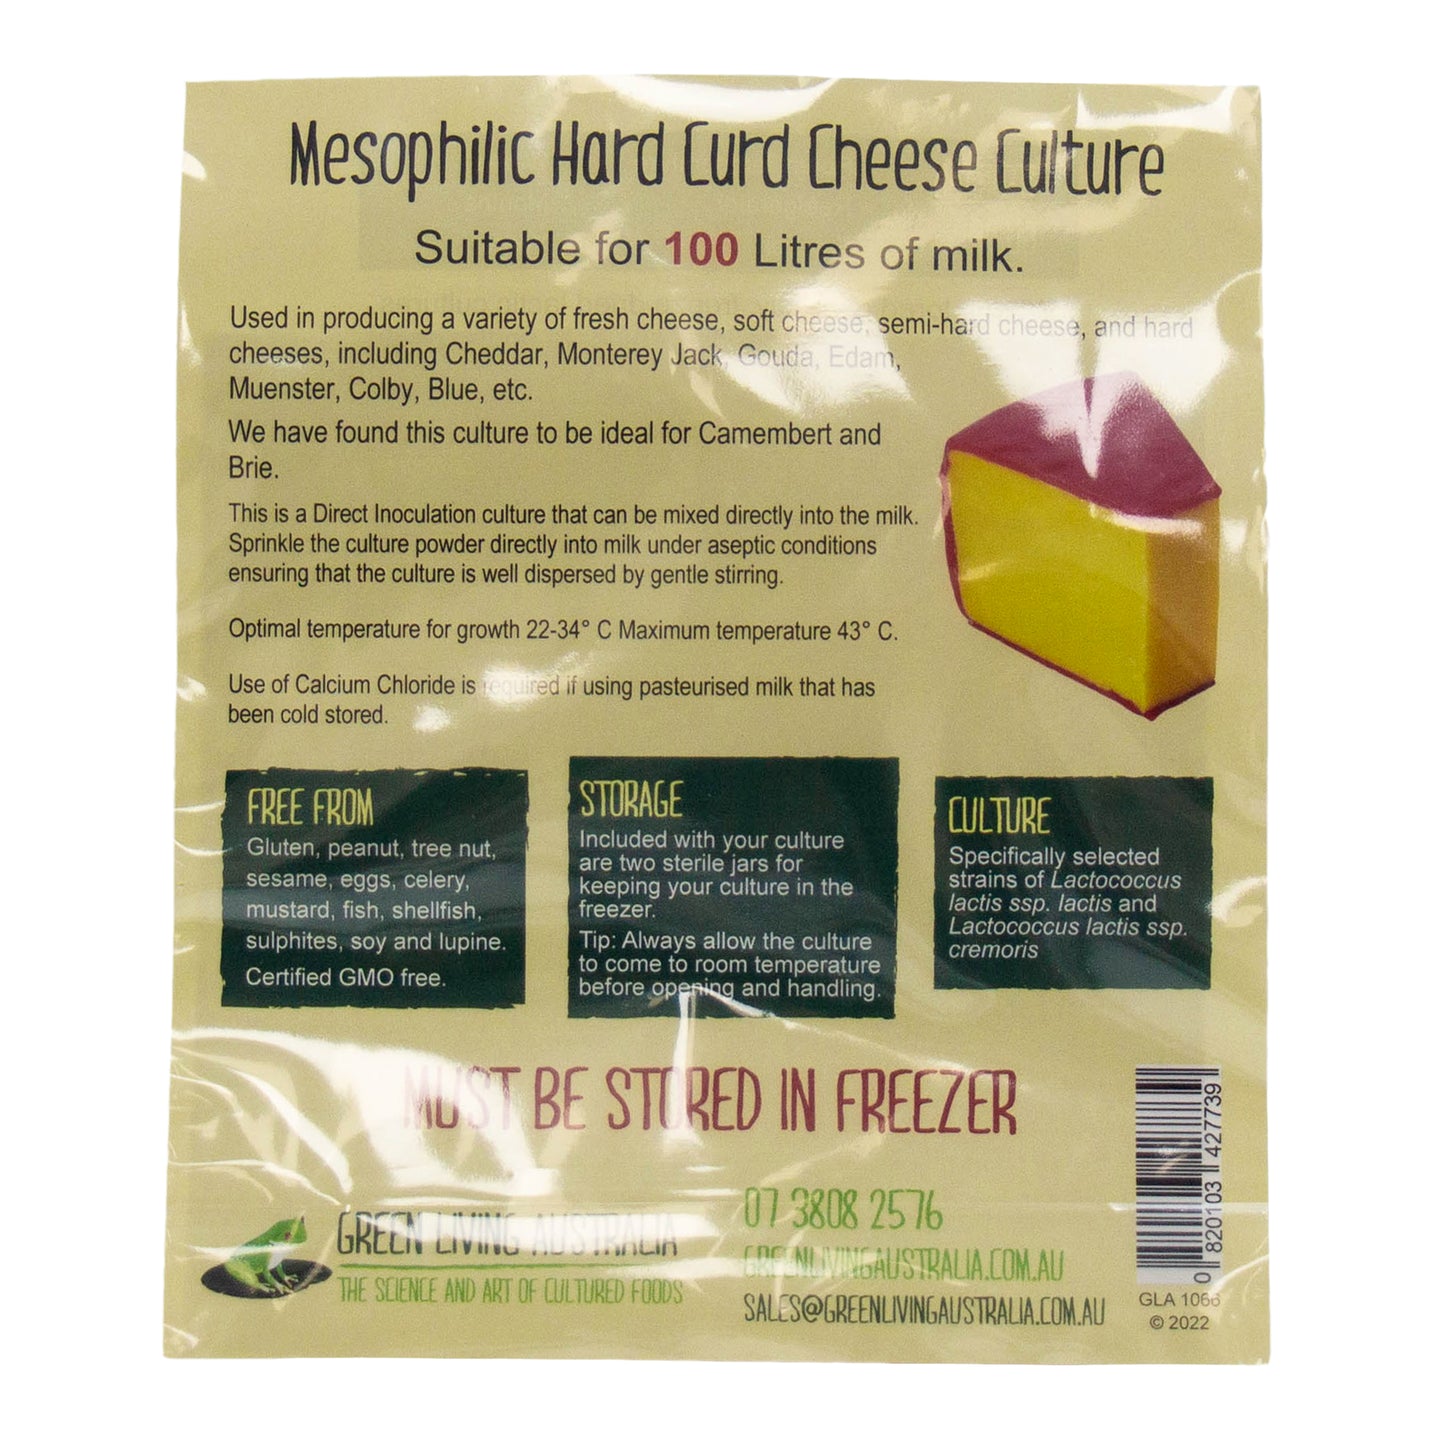 Mesophilic hard curd cheese culture suitable for up to 100 litres of milk. 